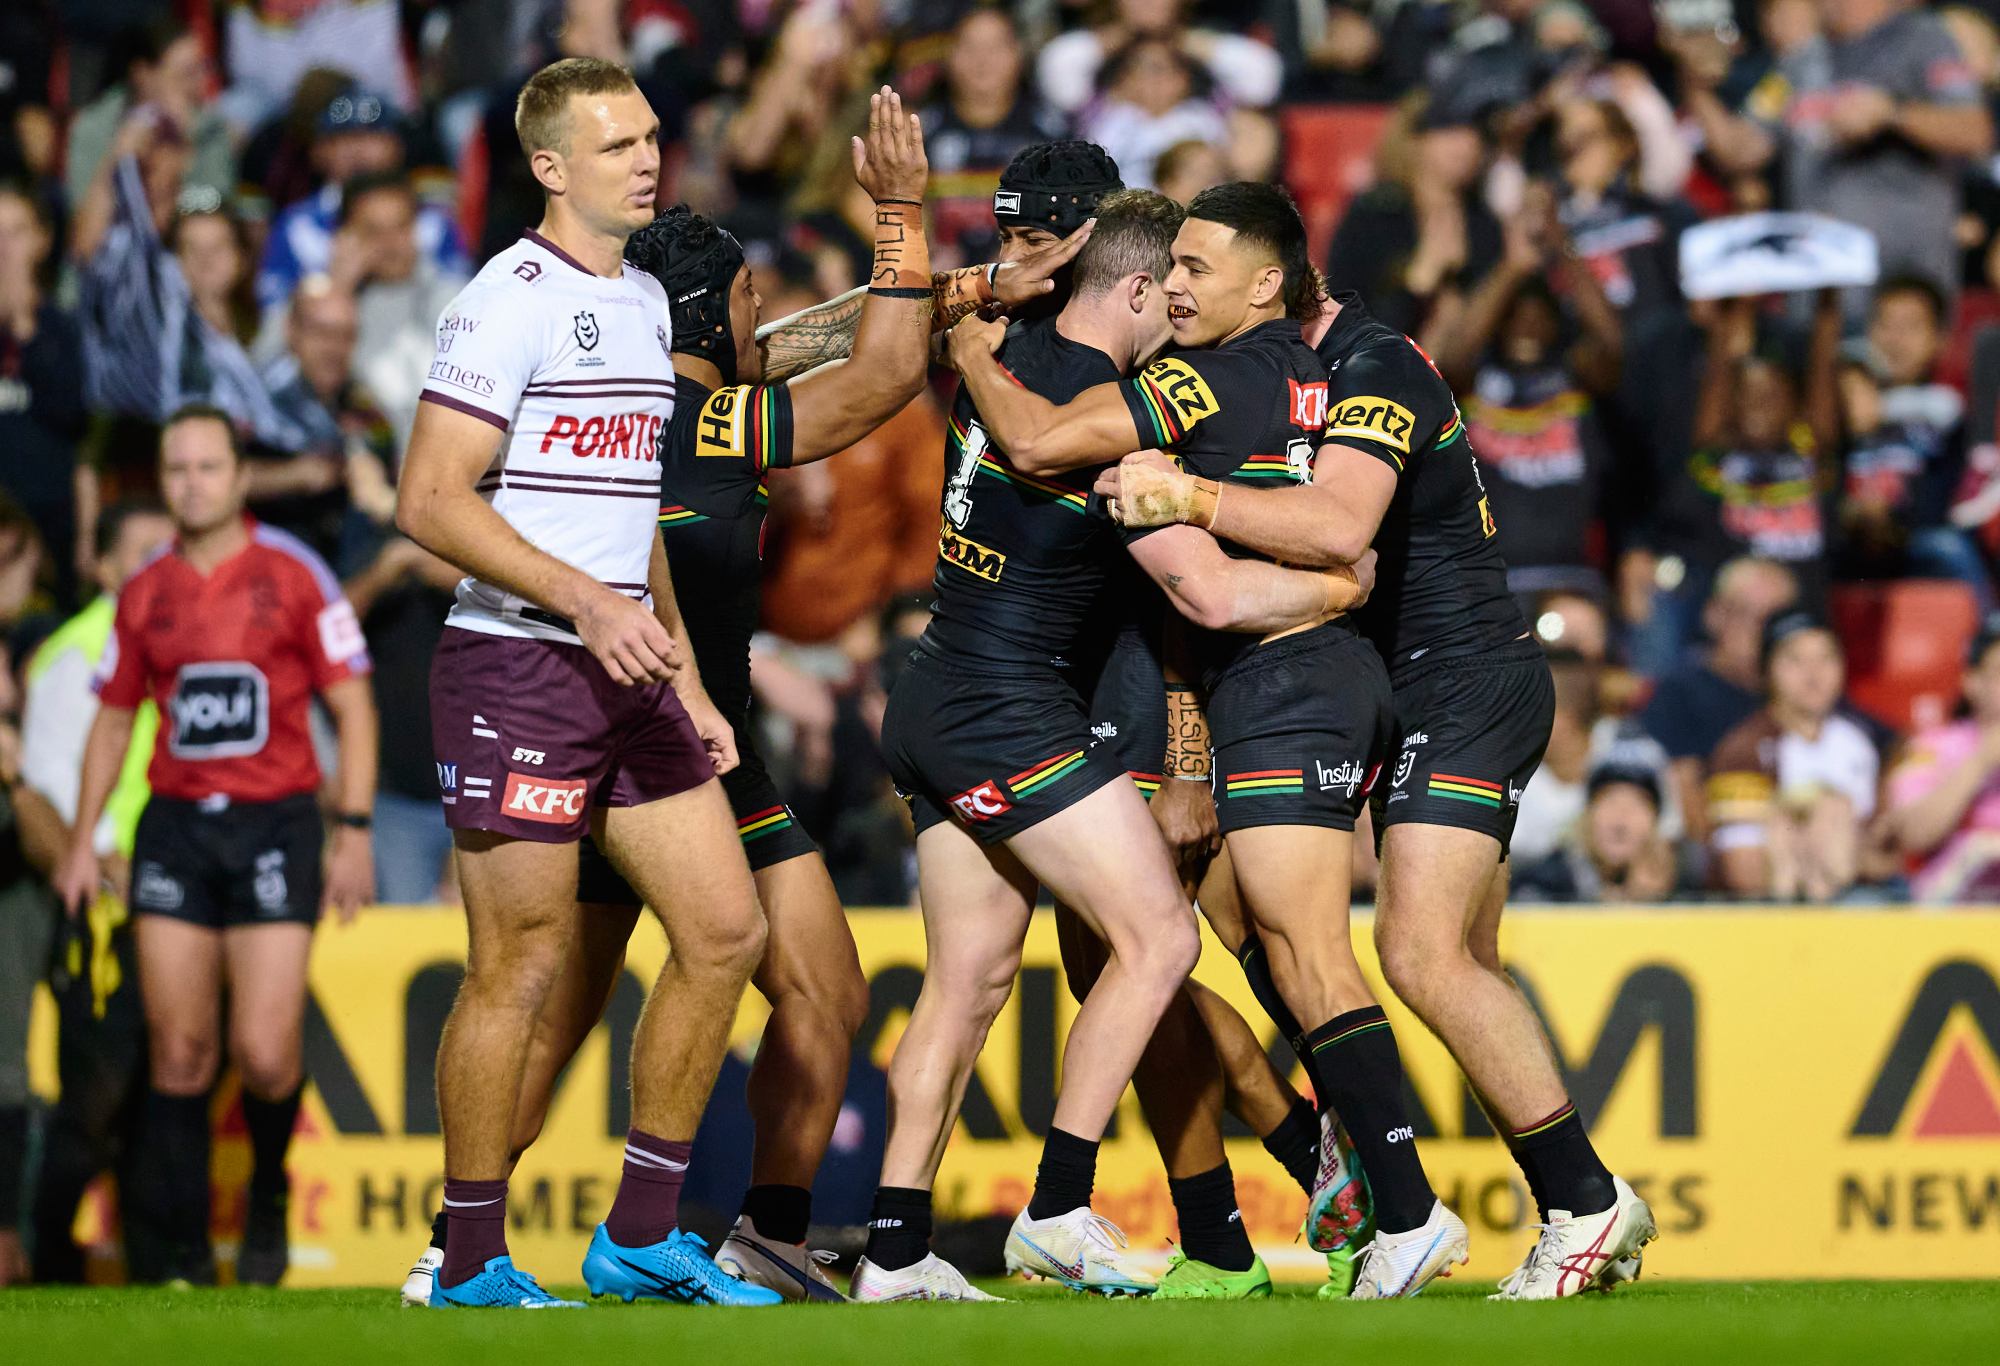 PENRITH, AUSTRALIA - APRIL 08: Dylan Edwards of the Panthers celebrates scoring a try with team mates during the round six NRL match between Penrith Panthers and Manly Sea Eagles at BlueBet Stadium on April 08, 2023 in Penrith, Australia. (Photo by Brett Hemmings/Getty Images)